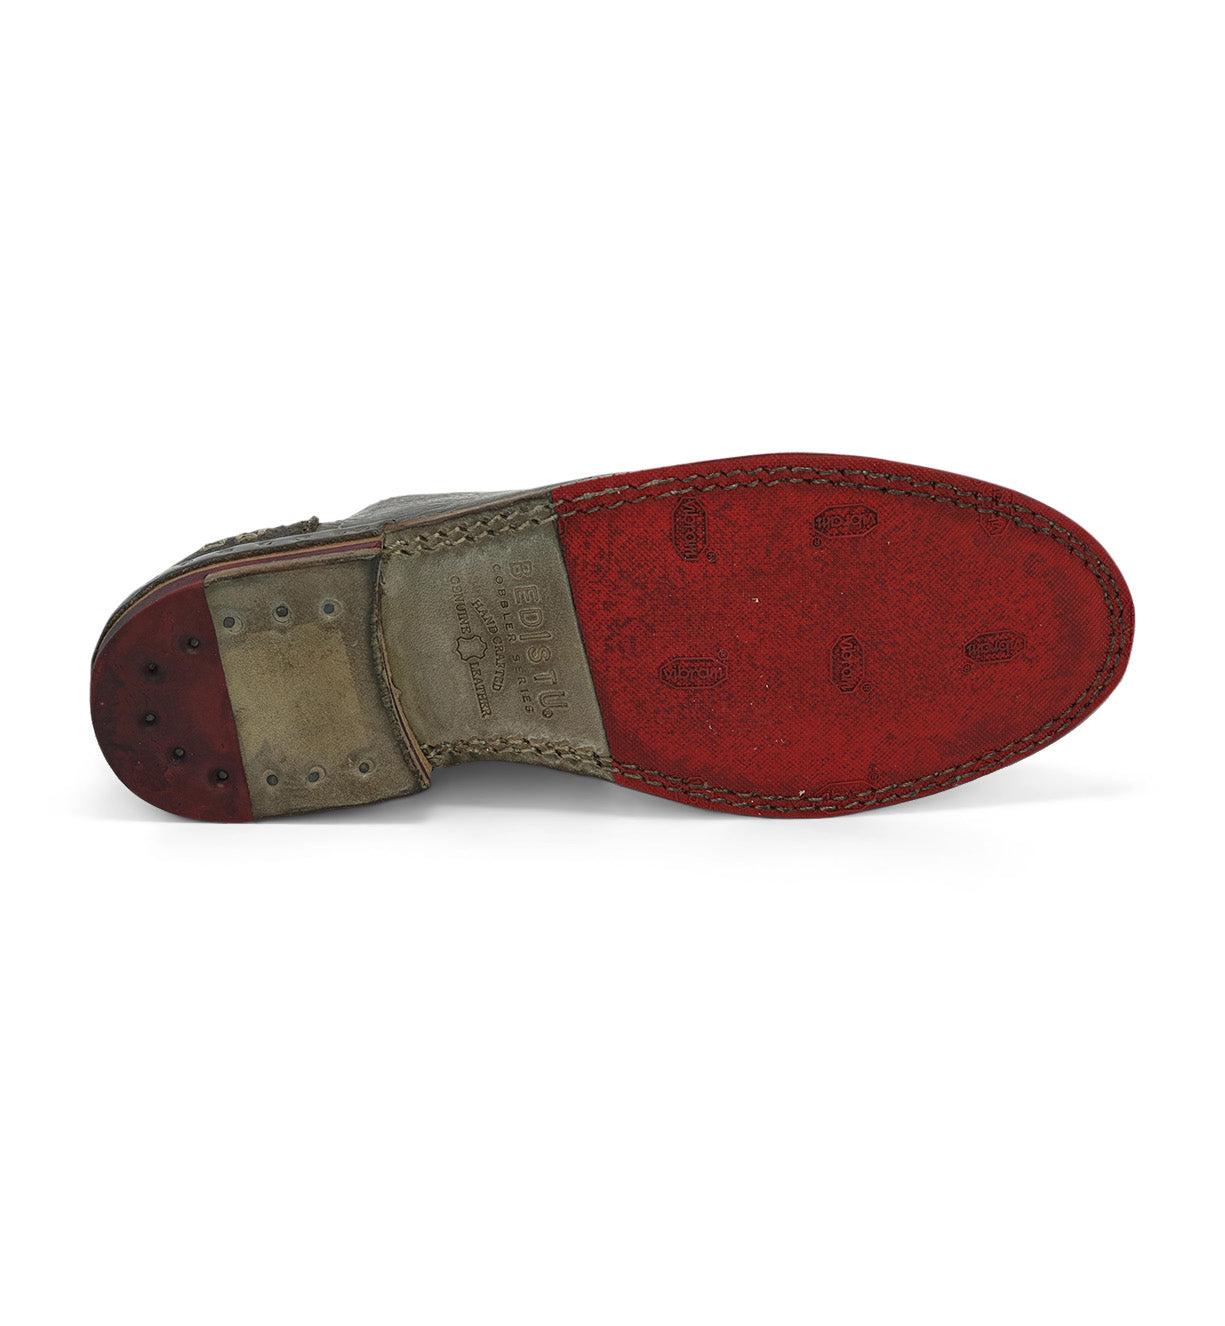 A pair of Bed Stu Plio shoes with red soles on a white background.